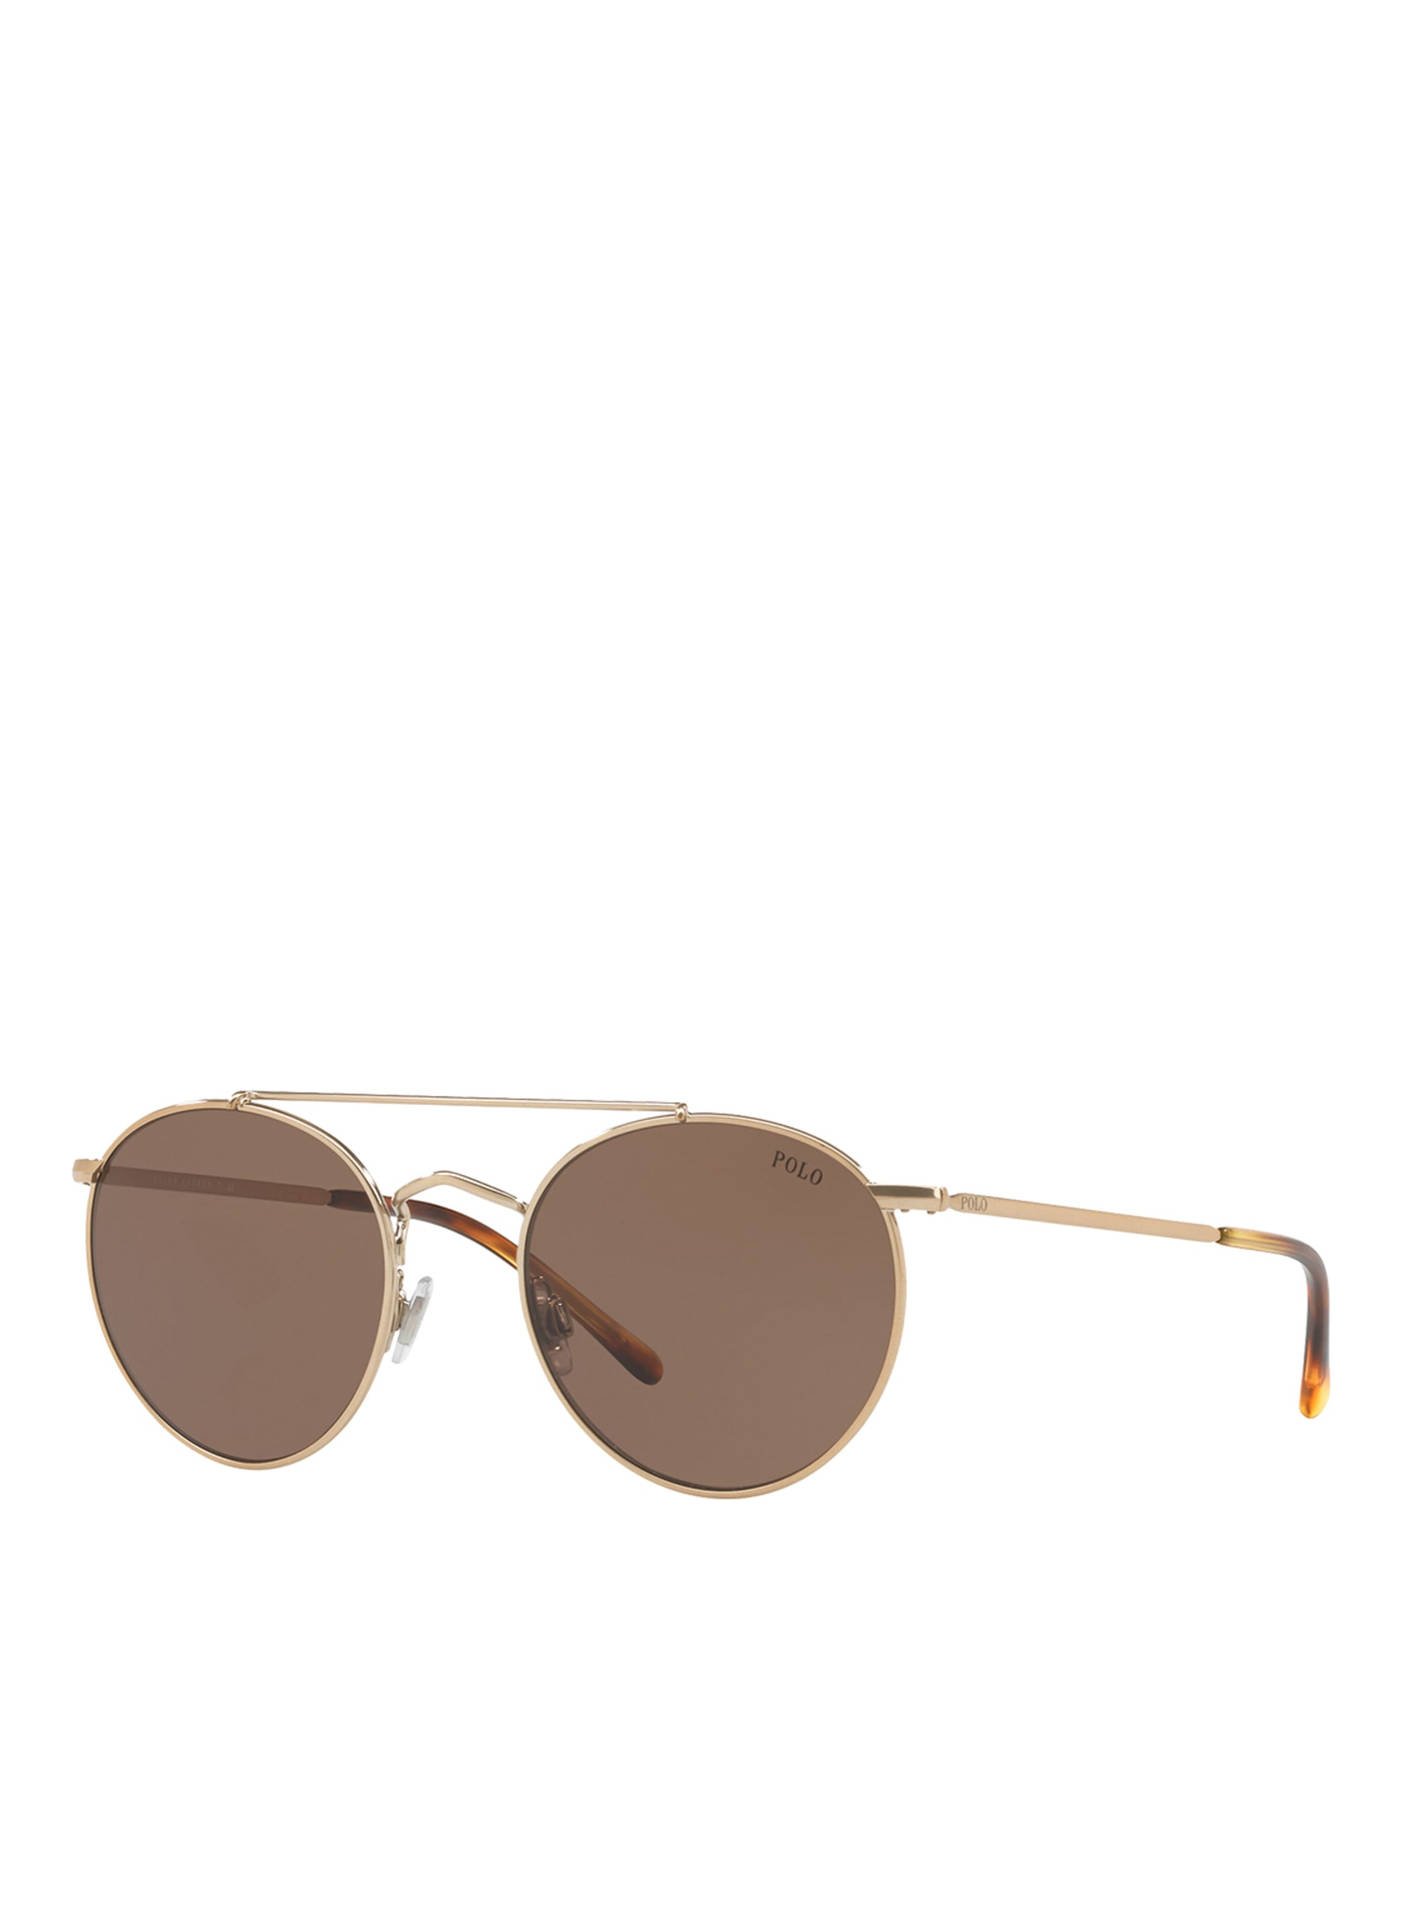 Stylish Round Polo Sunglasses for a Dashing Appeal Wallpaper